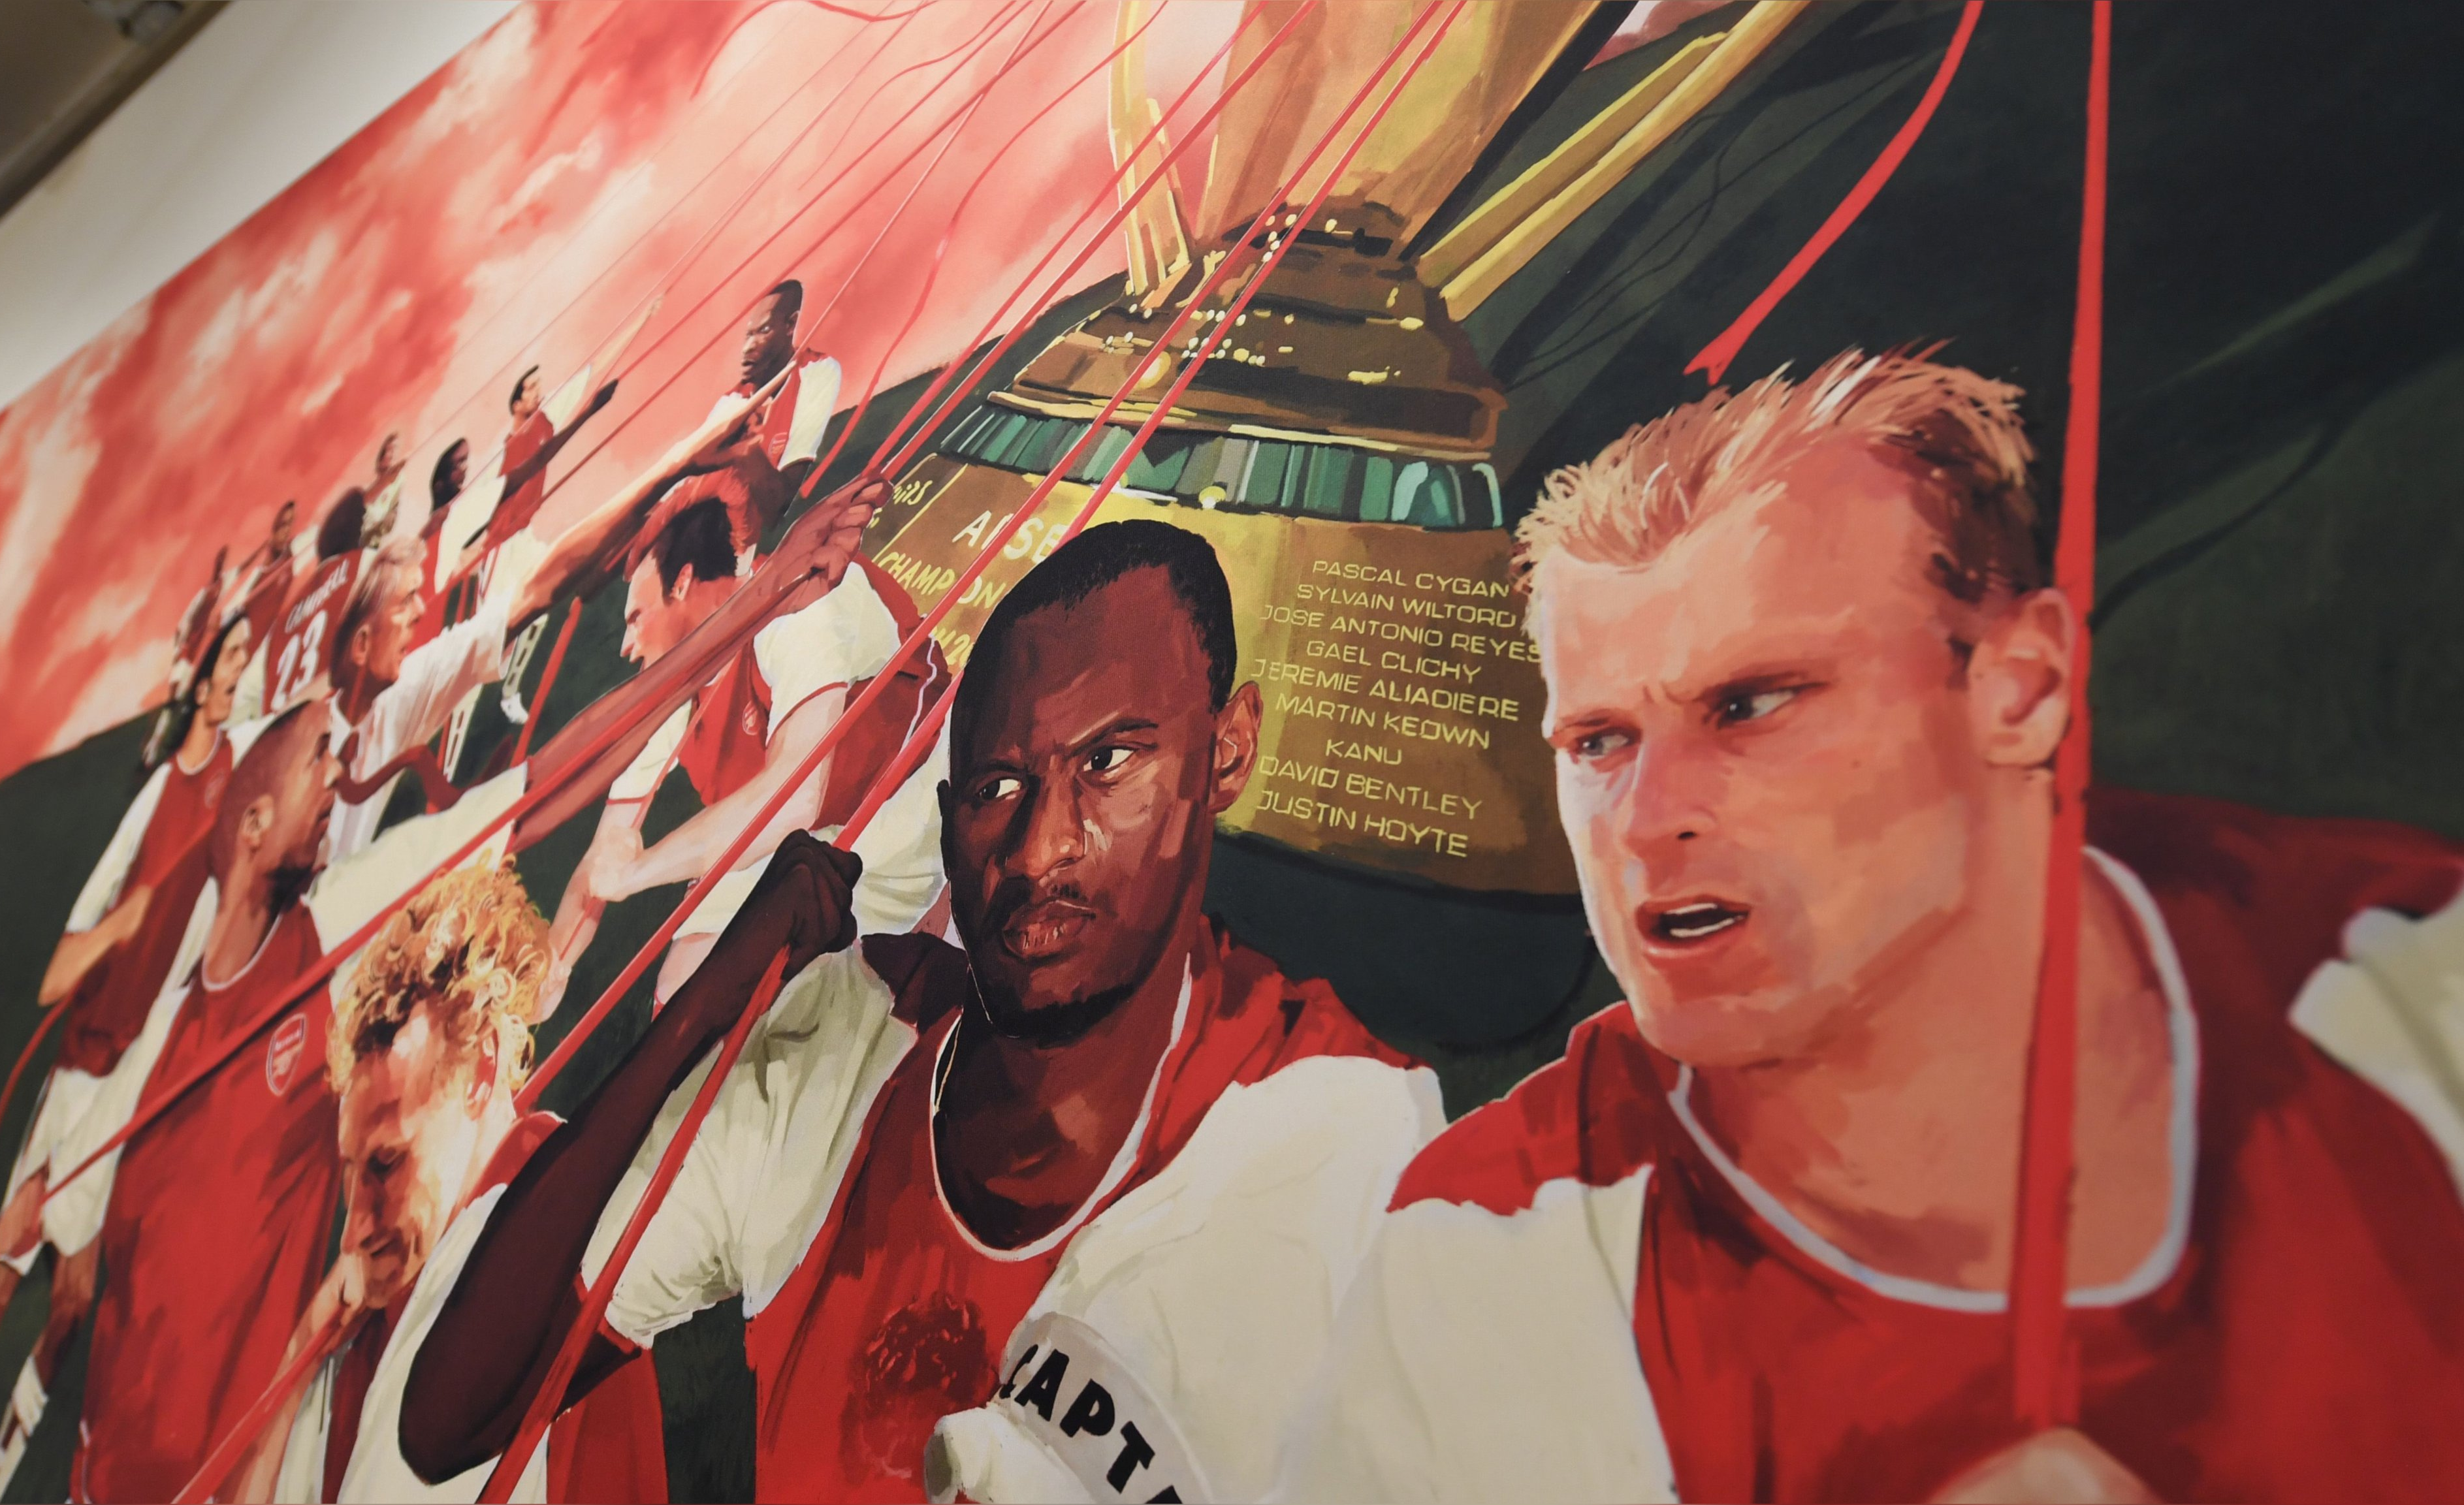 Arsenal, Arsenal Togetherness project, Premier League